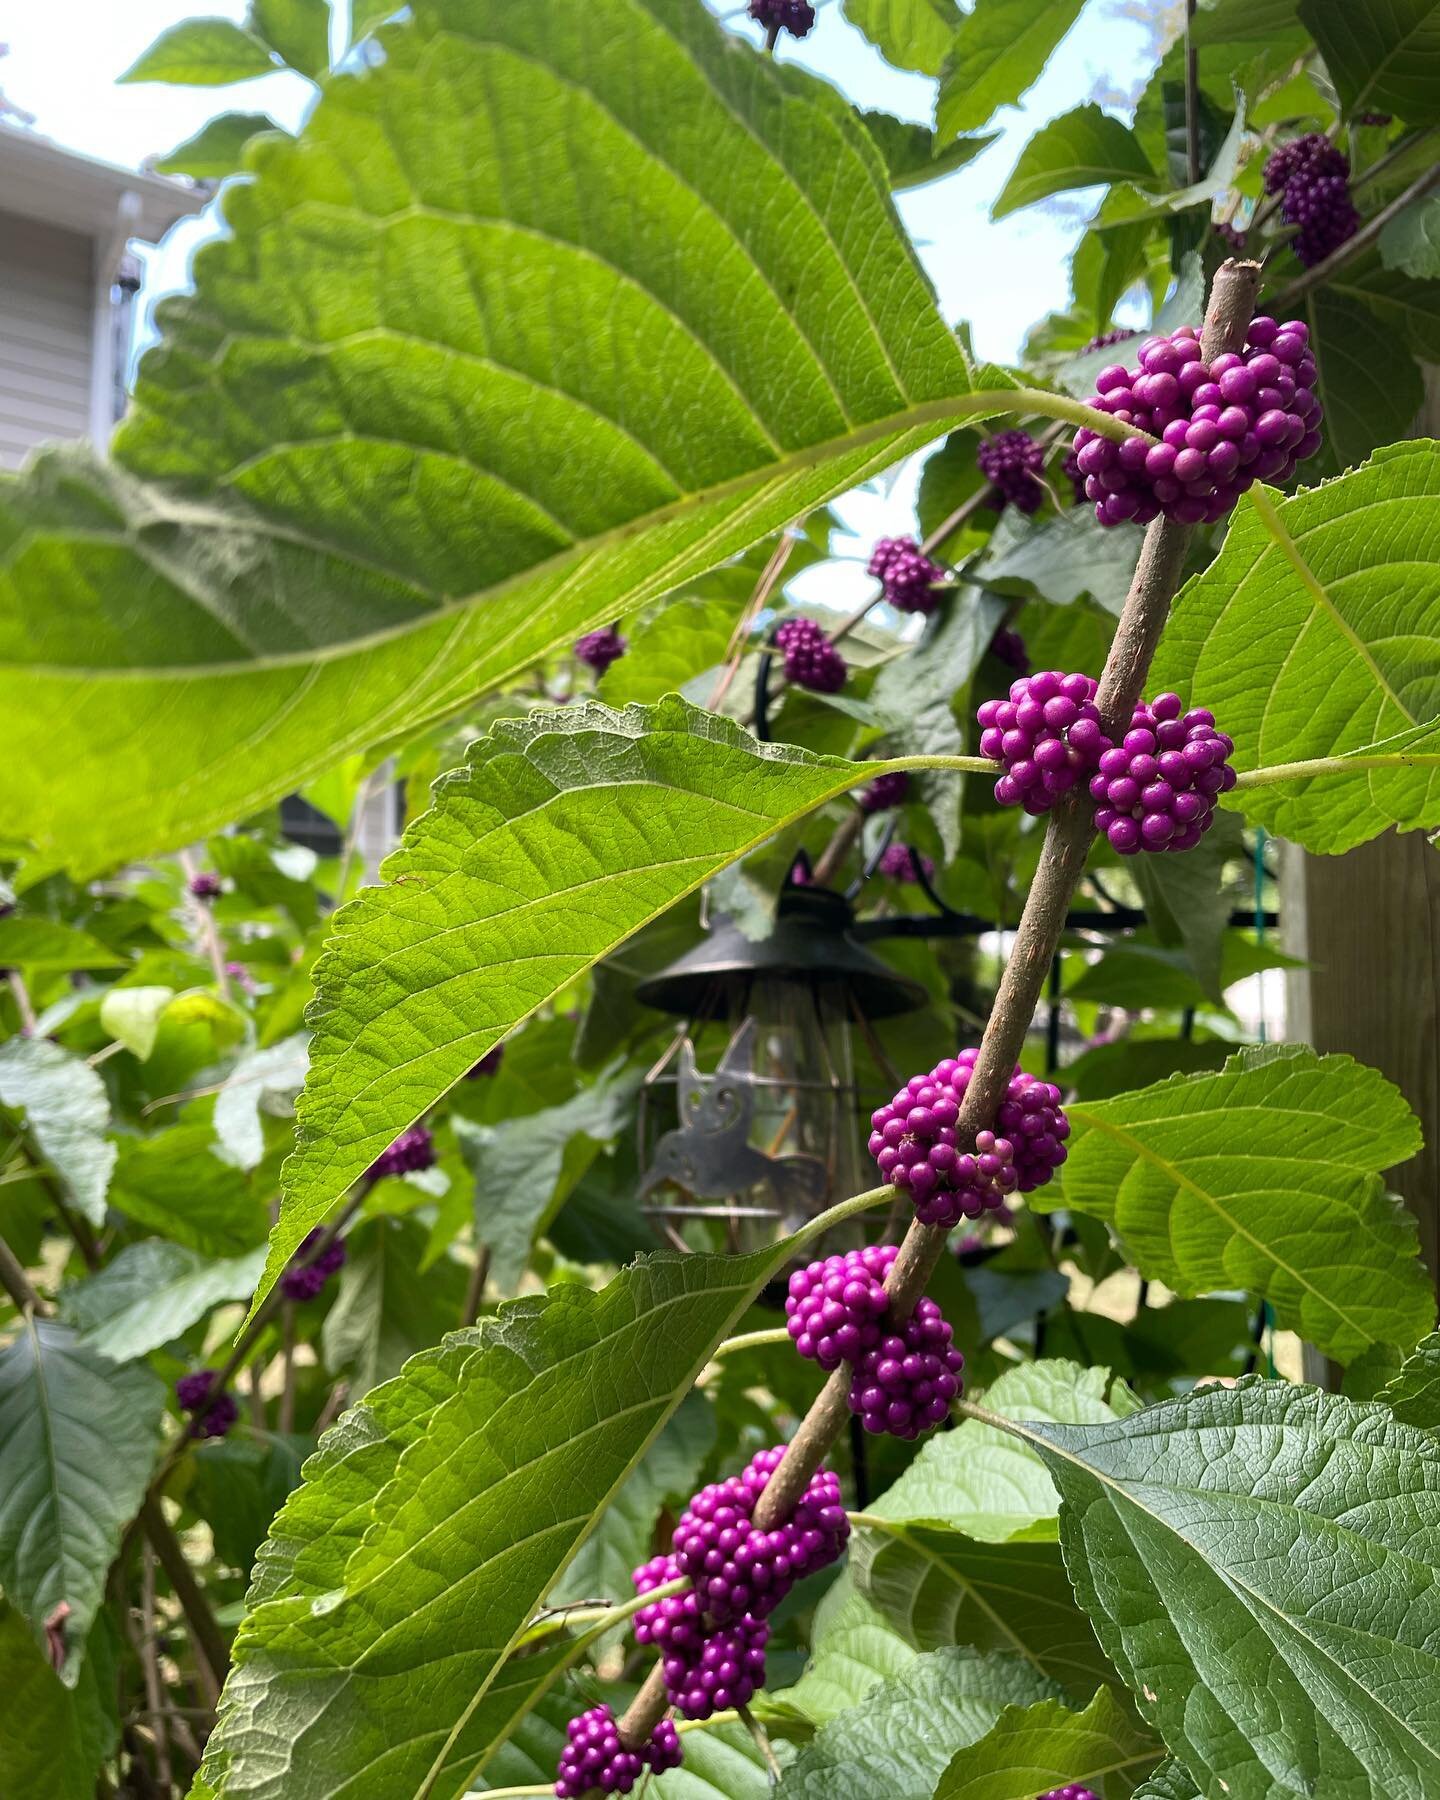 What is the first signal you notice that tells you about the seasons are changing? 

The beautyberry in my yard signals the Autumn 🍂 Equinox for me. We also call this Lillian&rsquo;s birthday bush because it&rsquo;s purple berries are always bright 